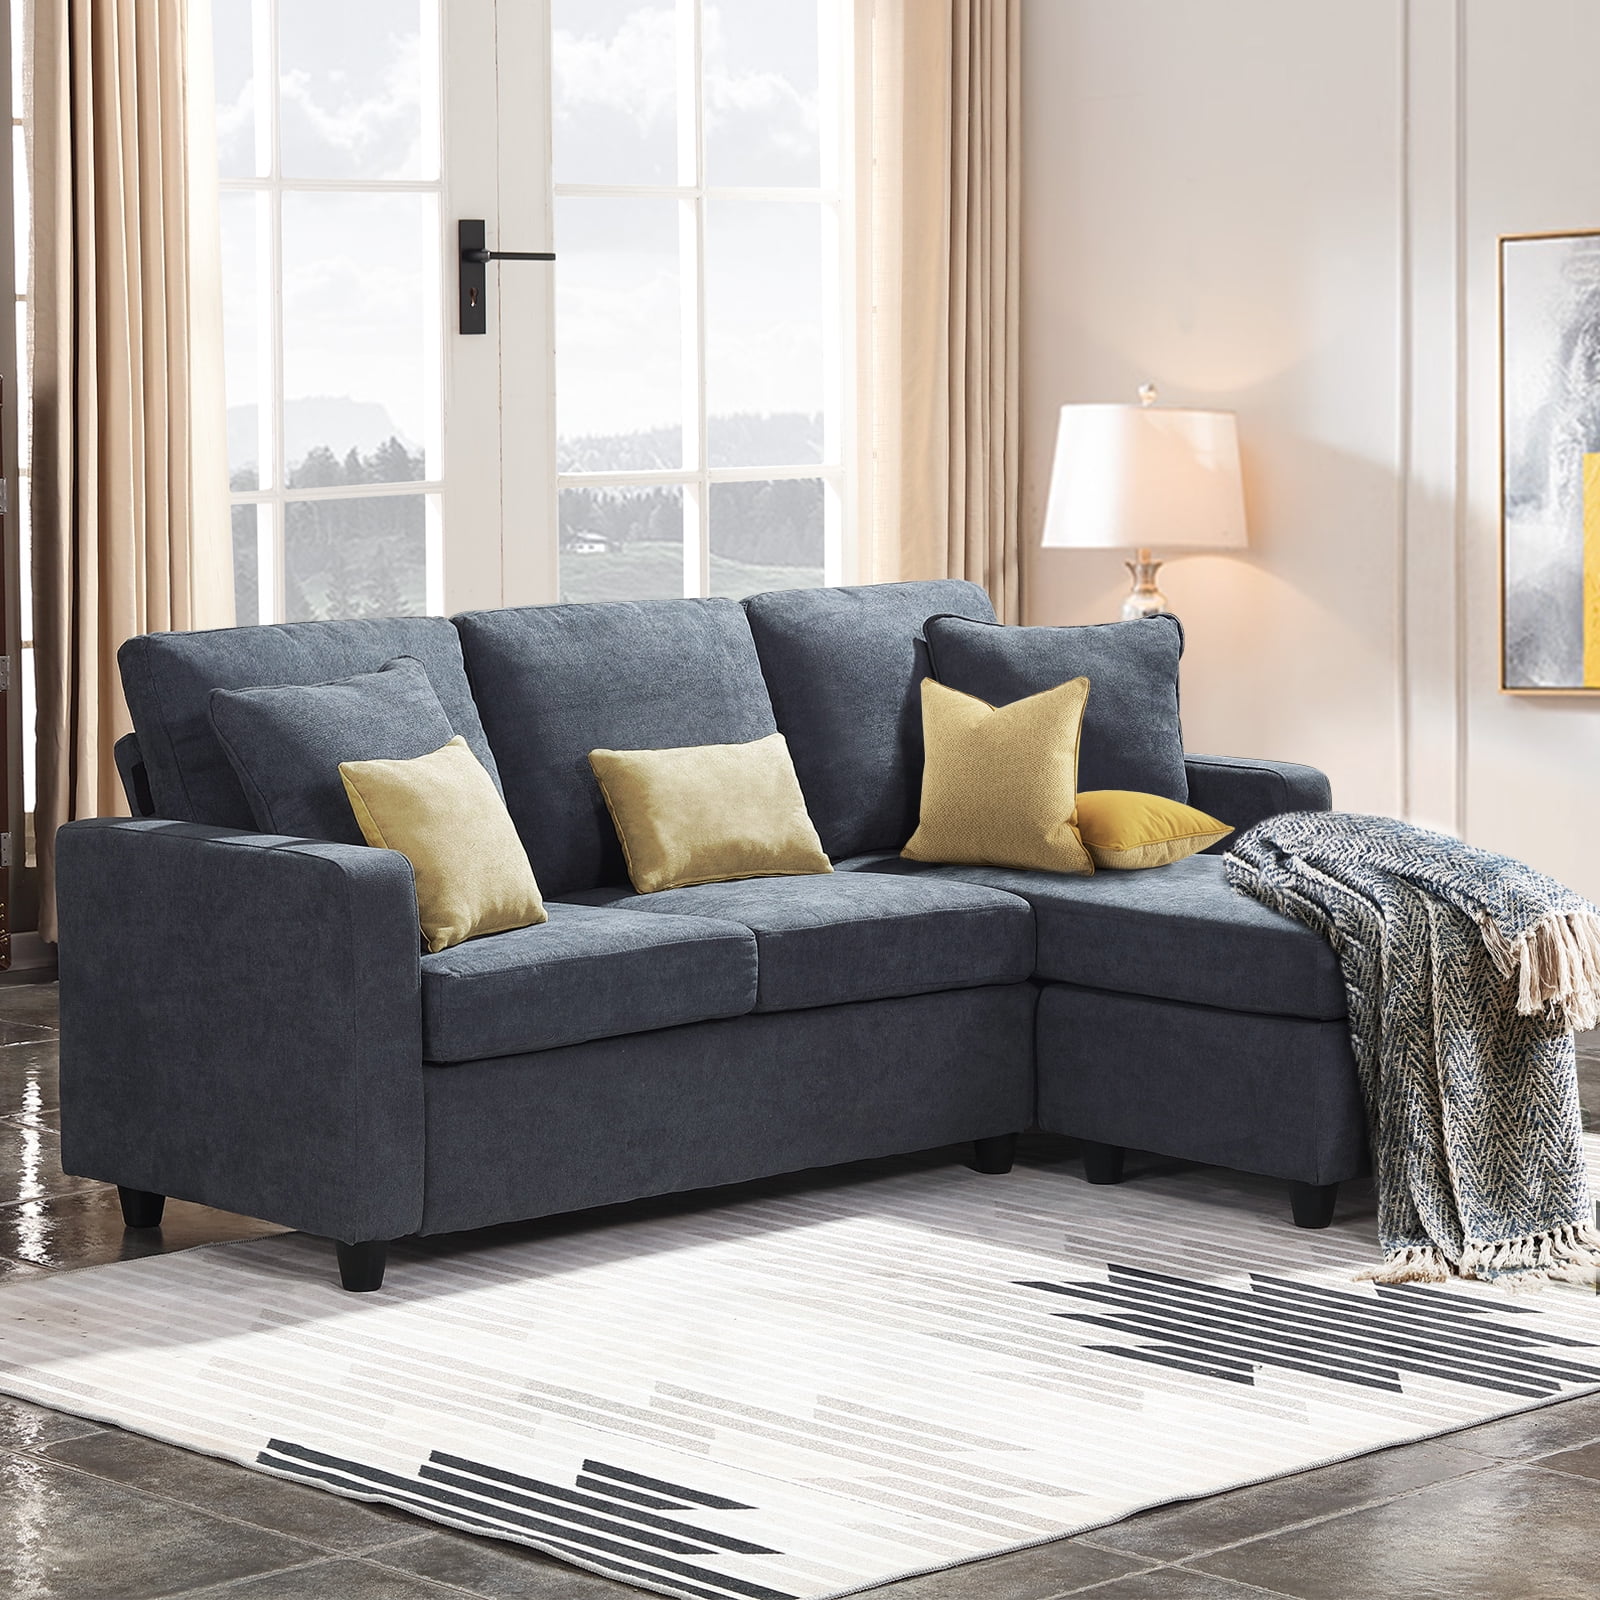 attent Memo Aanwezigheid HONBAY Convertible Sectional Sofa Couch, L-Shaped Couch with Modern Linen  Fabric for Small Space Dark Grey - Walmart.com